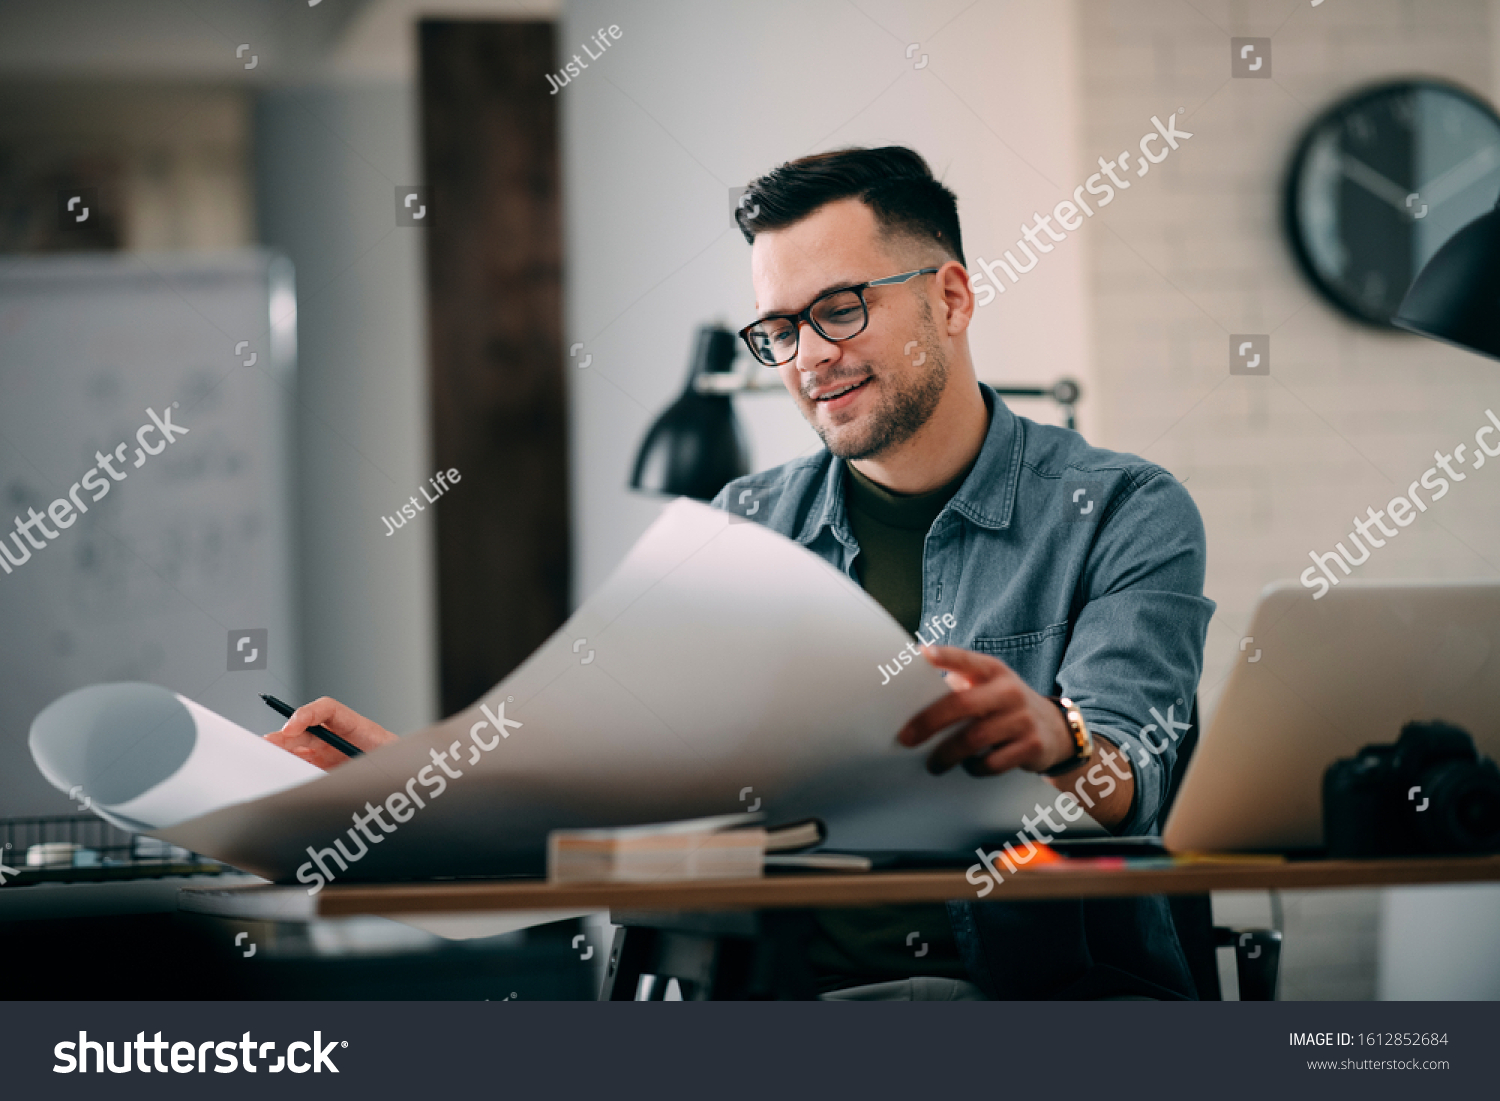 
Architect Engineer Design Working Planning Concept.
Portrait of a smiling young businessman working on blueprints at the office. #1612852684